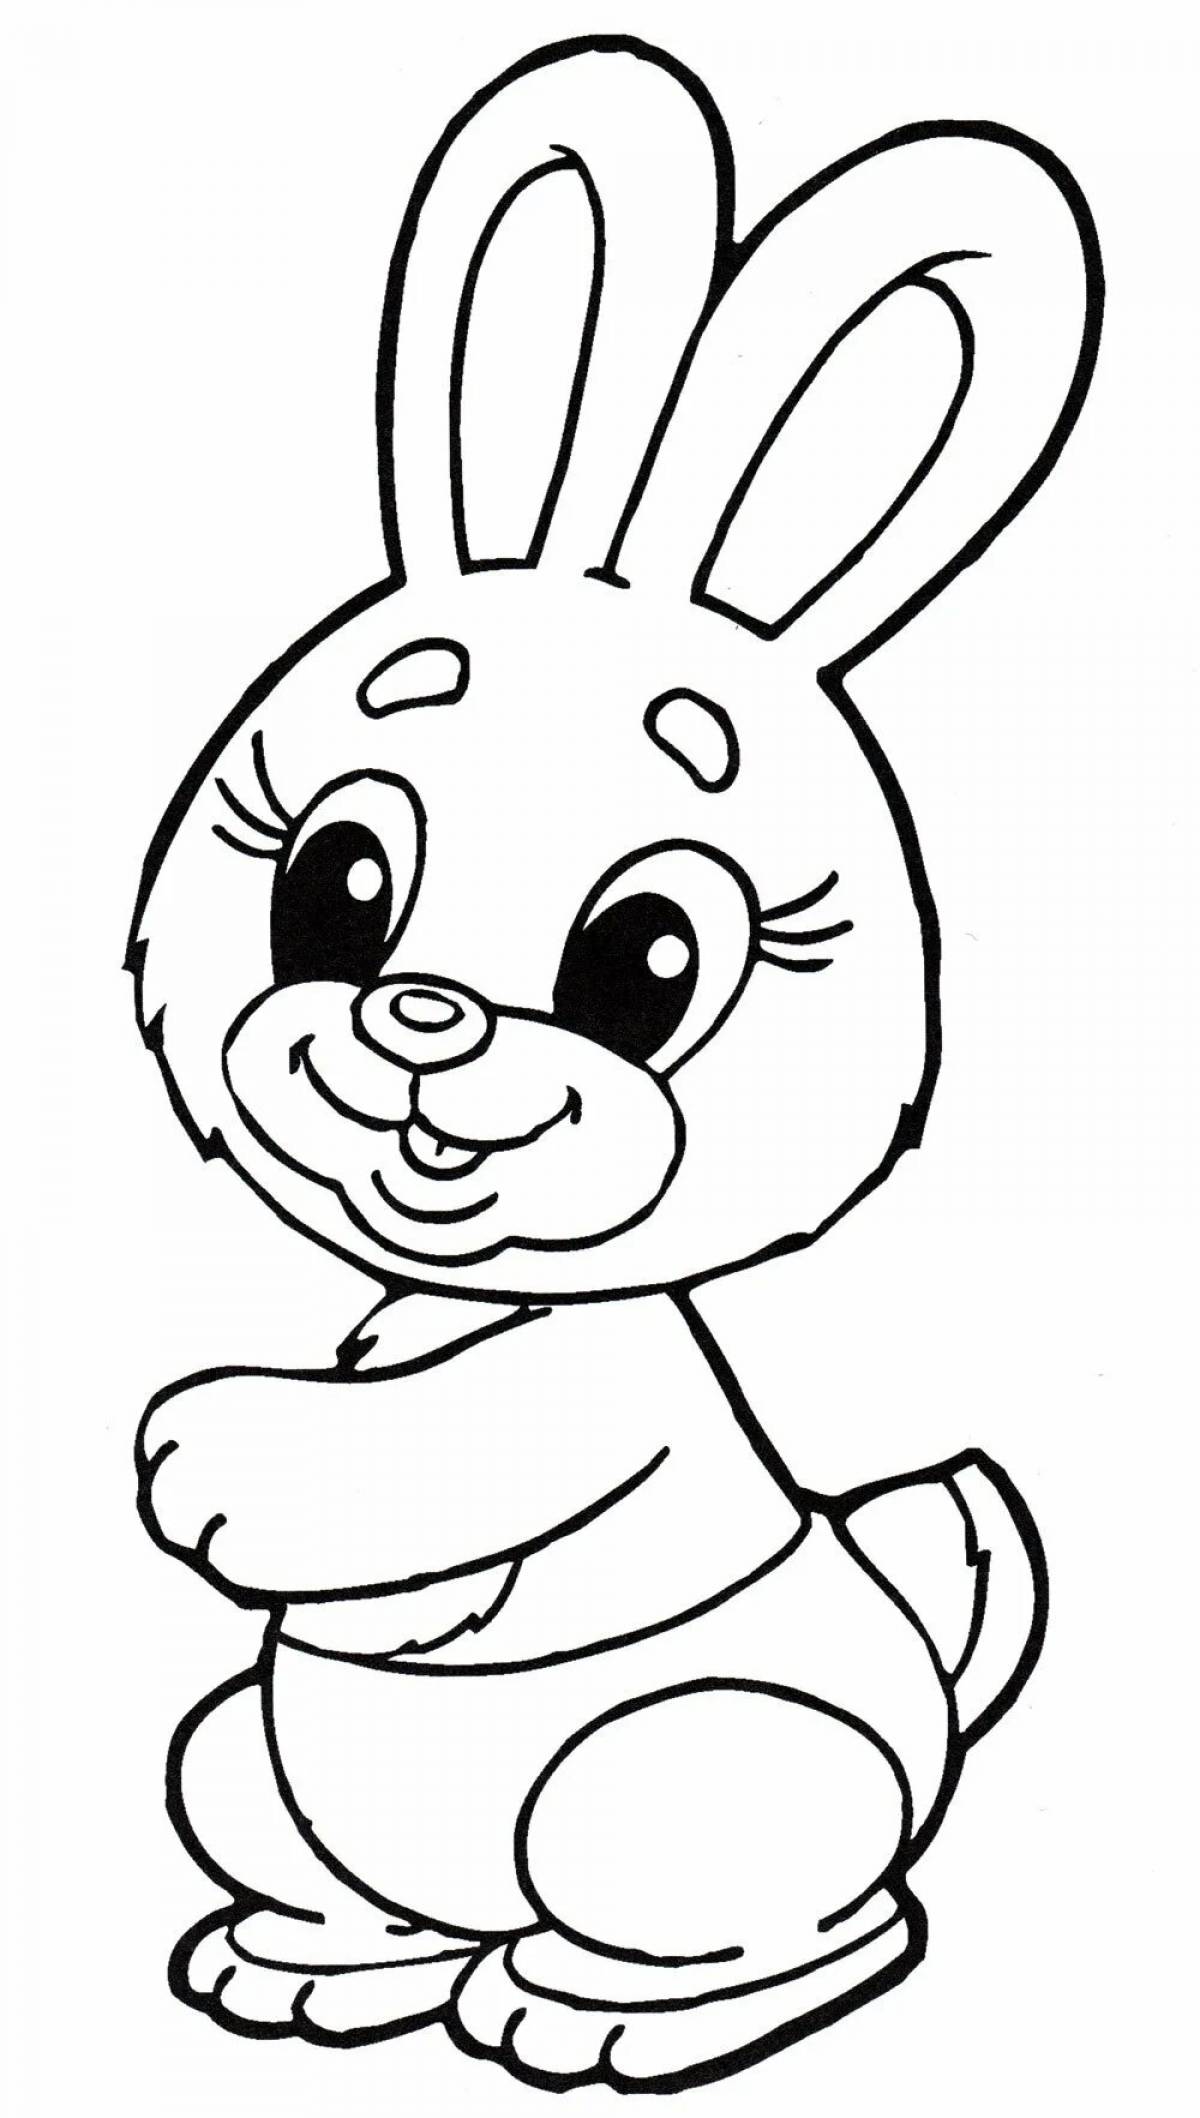 Unforgettable hare coloring for children 2-3 years old